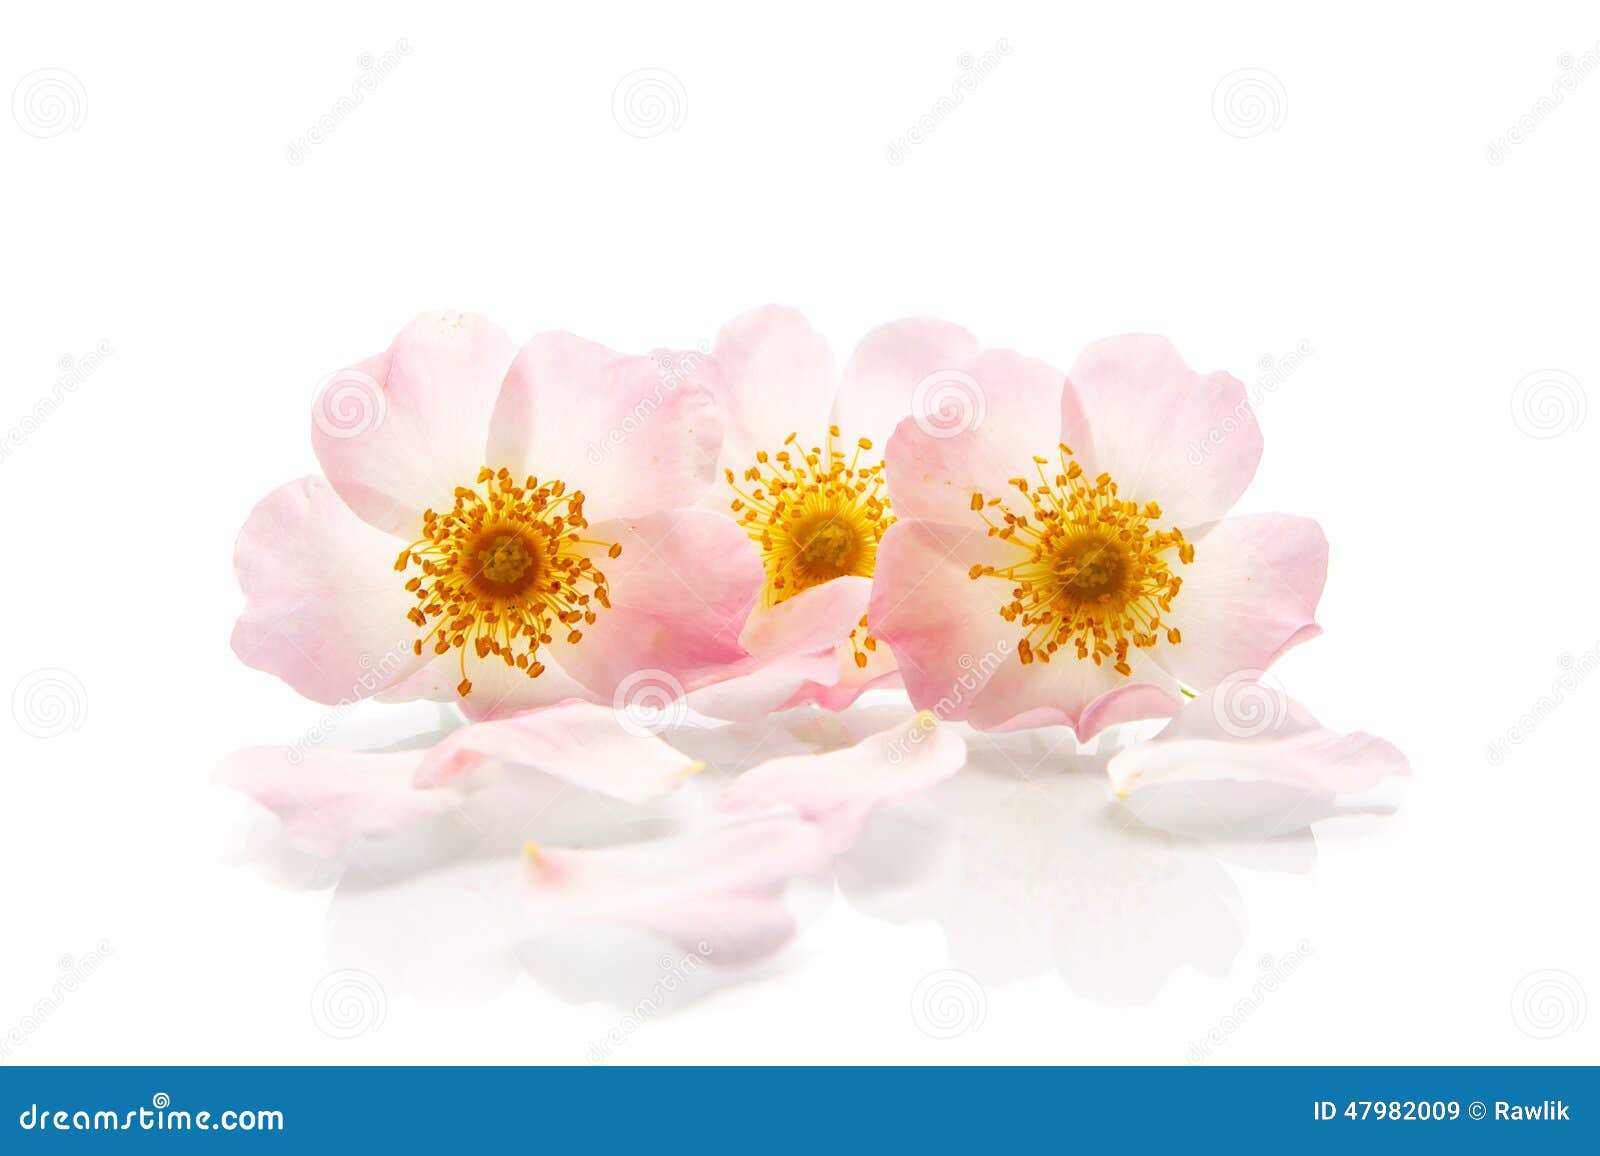 Bouquet of wild roses stock image. Image of branch, love - 47982009